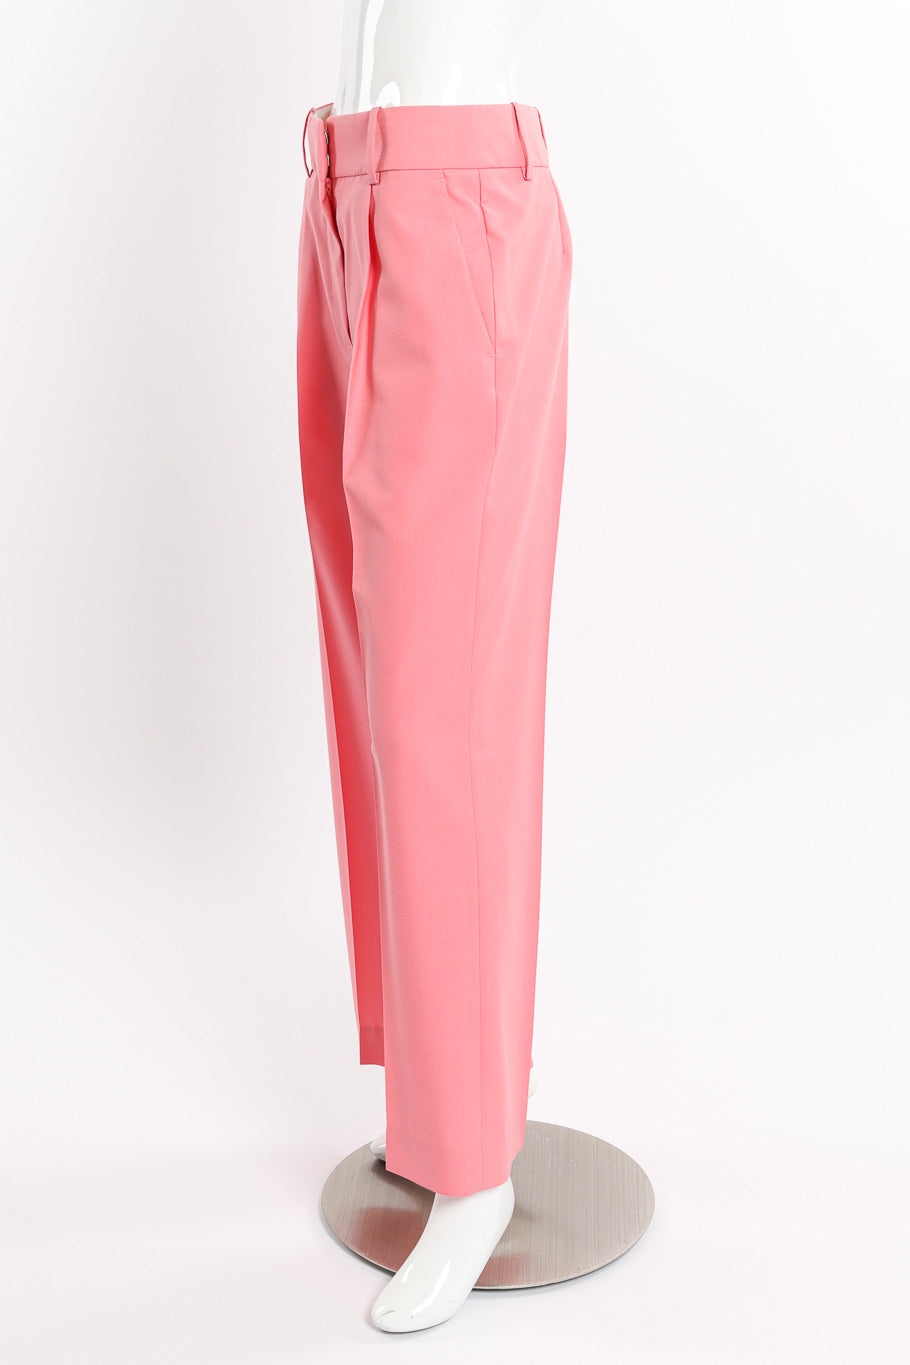 2020 S/S Pleated Wool Trousers by Givenchy on mannequin side @recessla